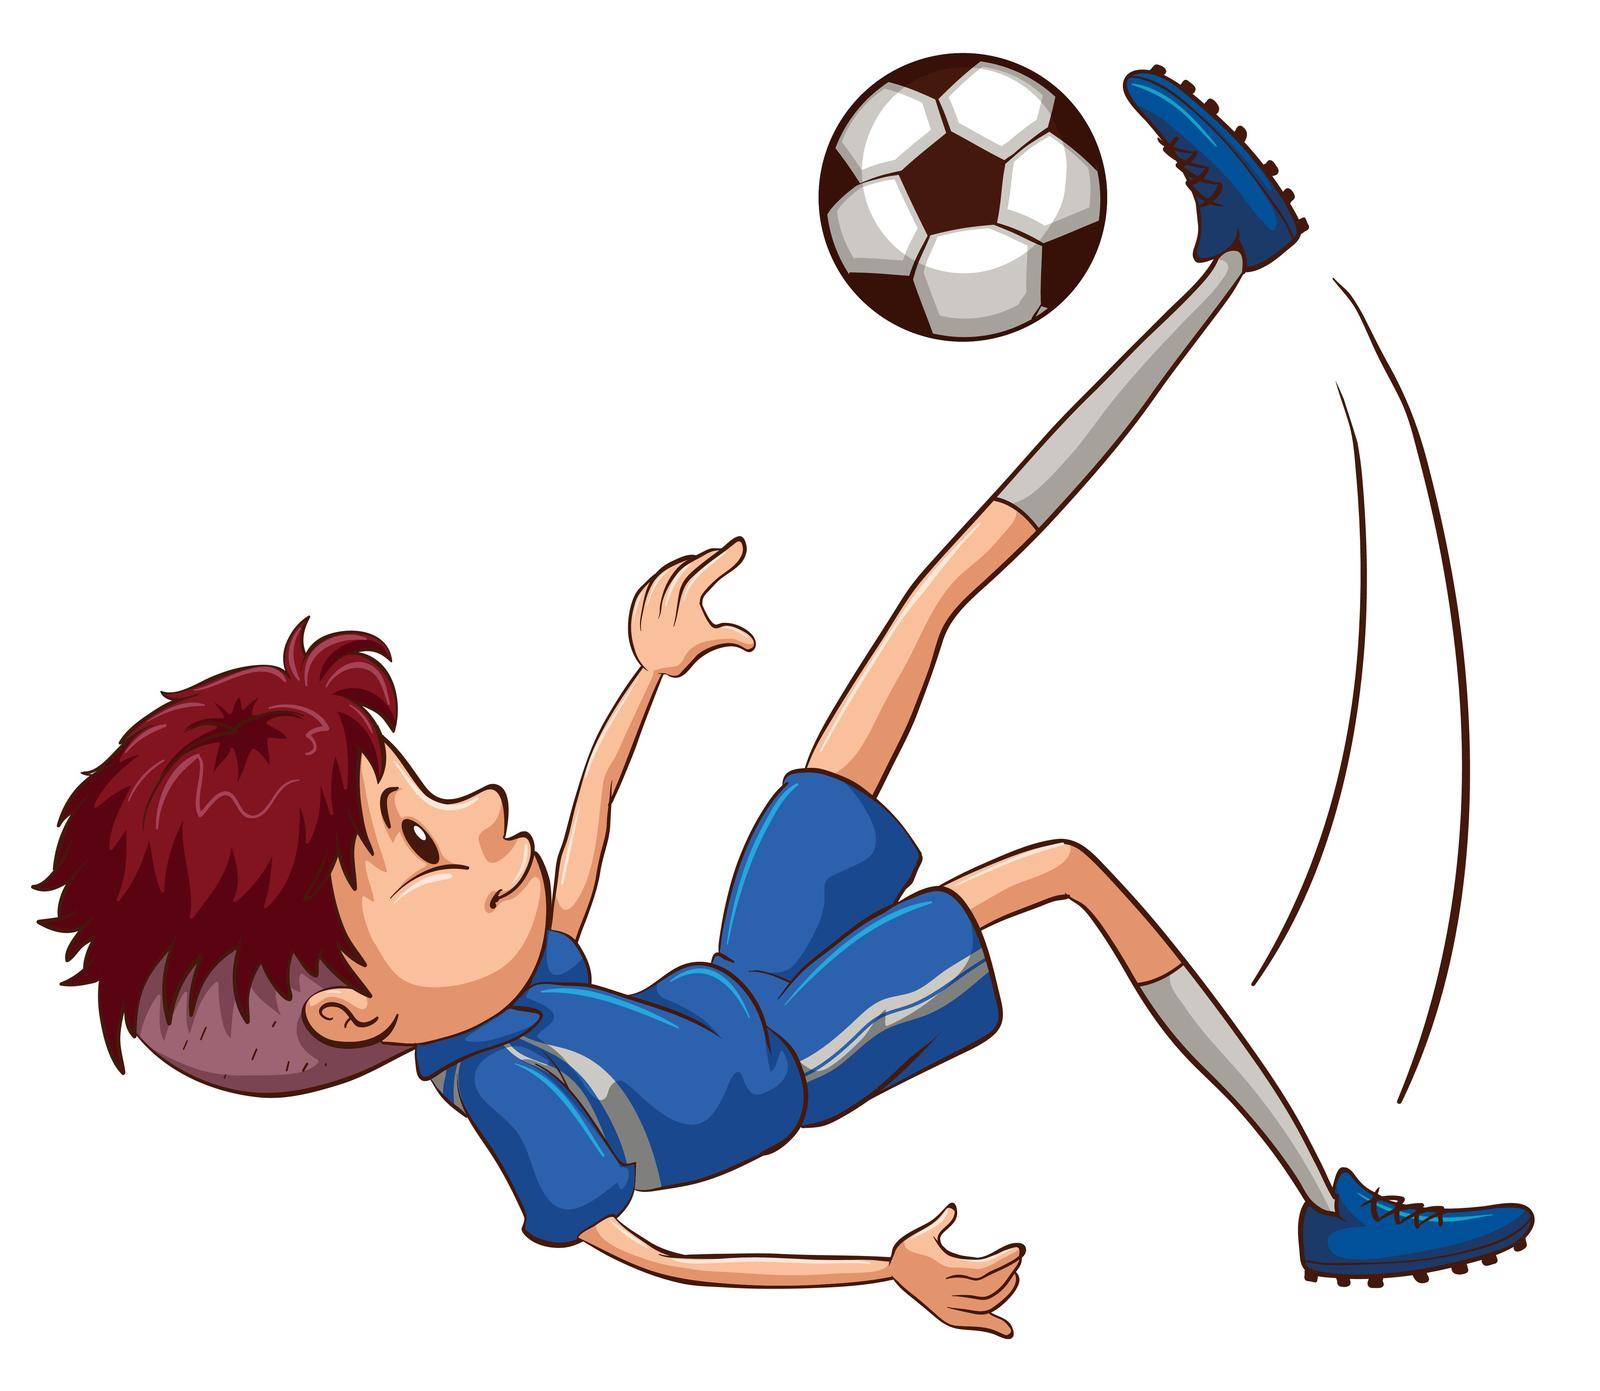 Illustration of a soccer player kicking the ball on a white background